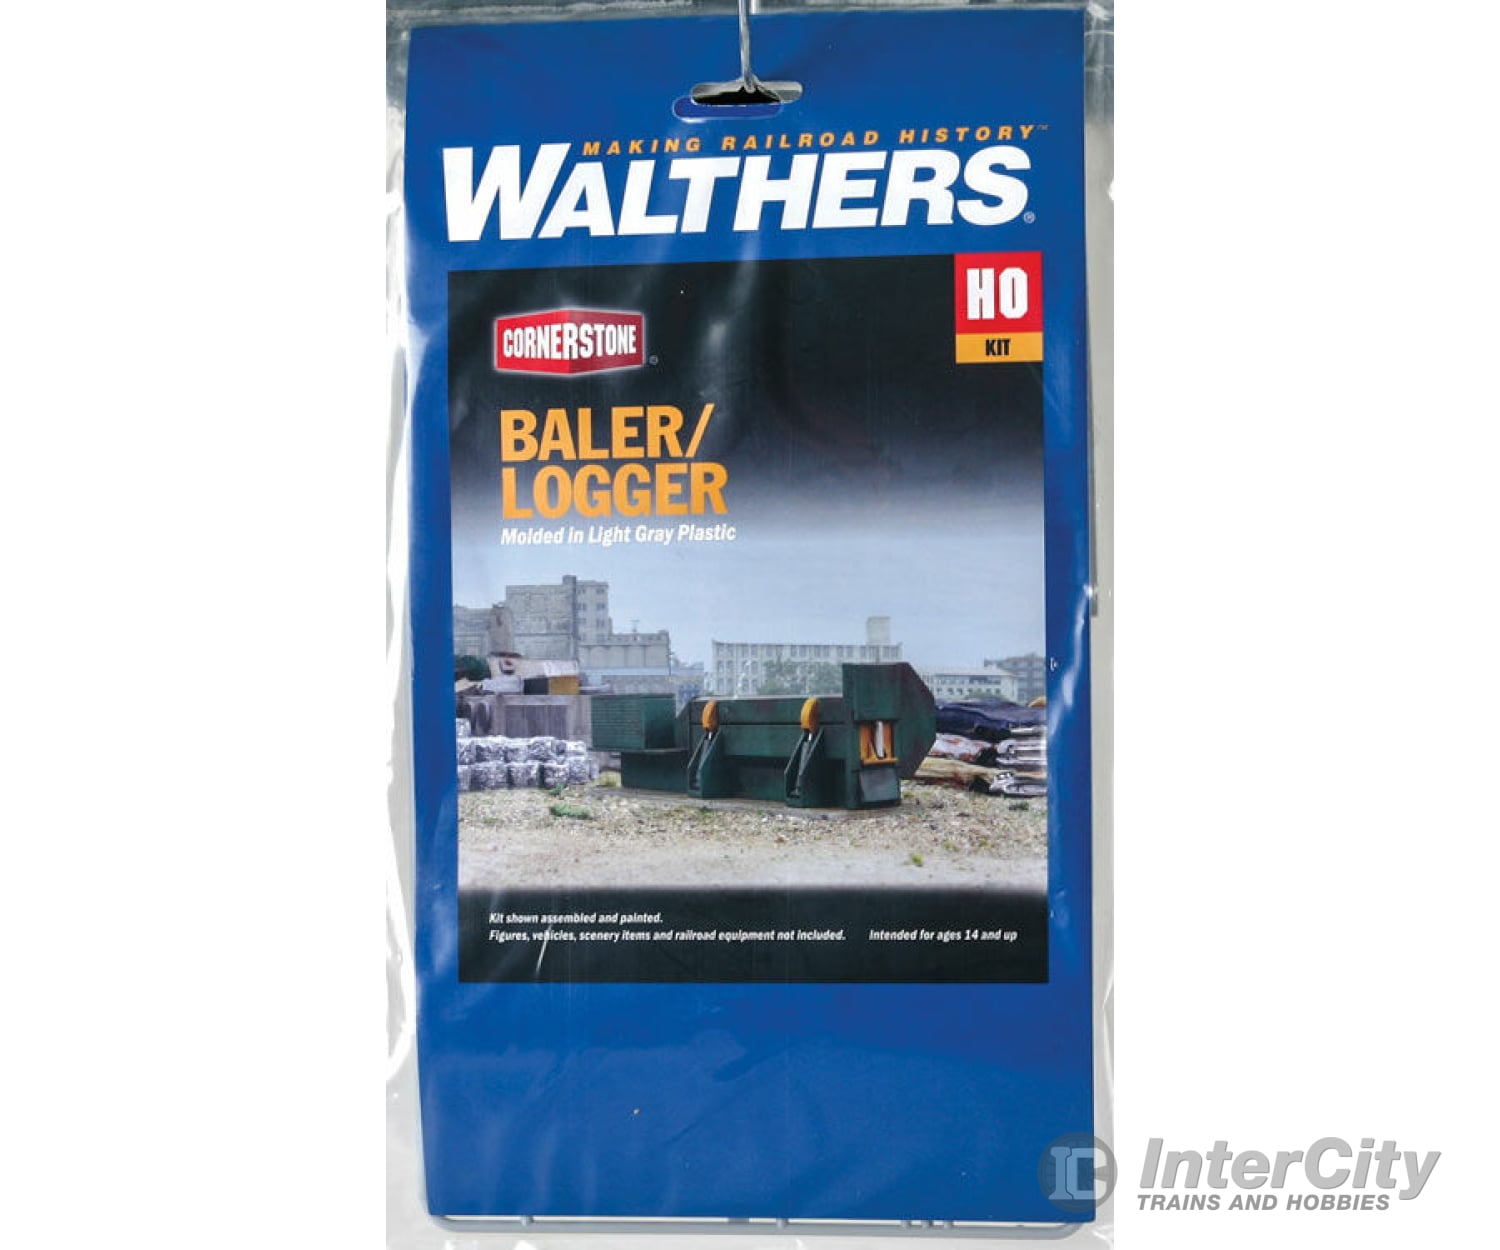 Walthers Cornerstone Ho 3631 Baler-Logger -- Kit - 4-5/8 X 1-3/8 1-1/4 11.7 3.4 3.1Cm Structures